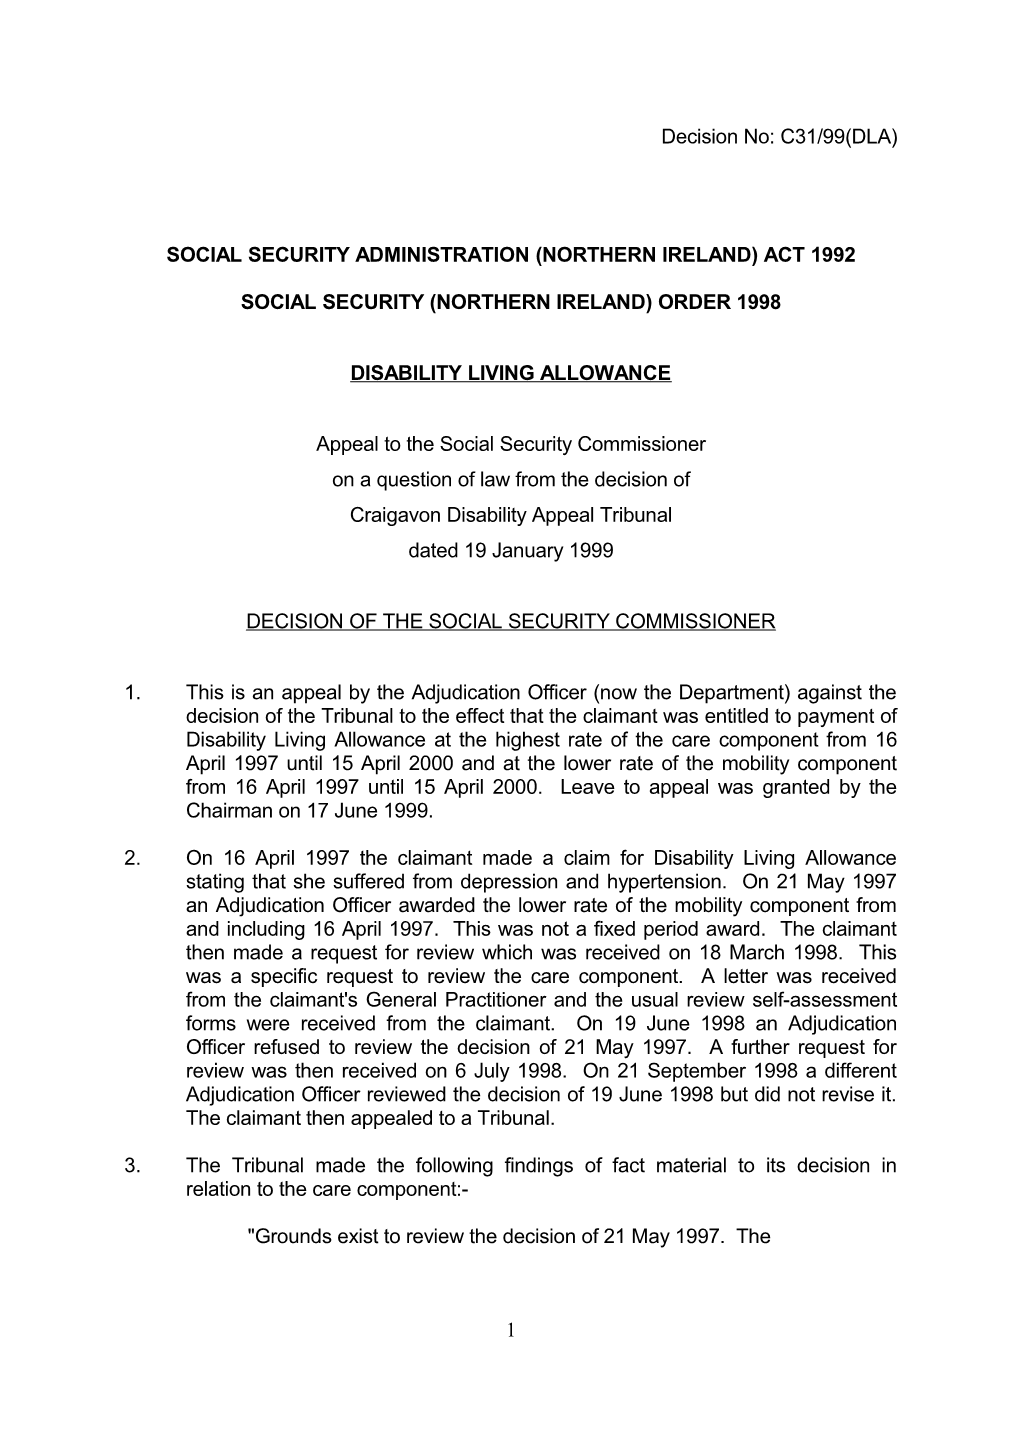 Social Security Administration (Northern Ireland) Act 1992